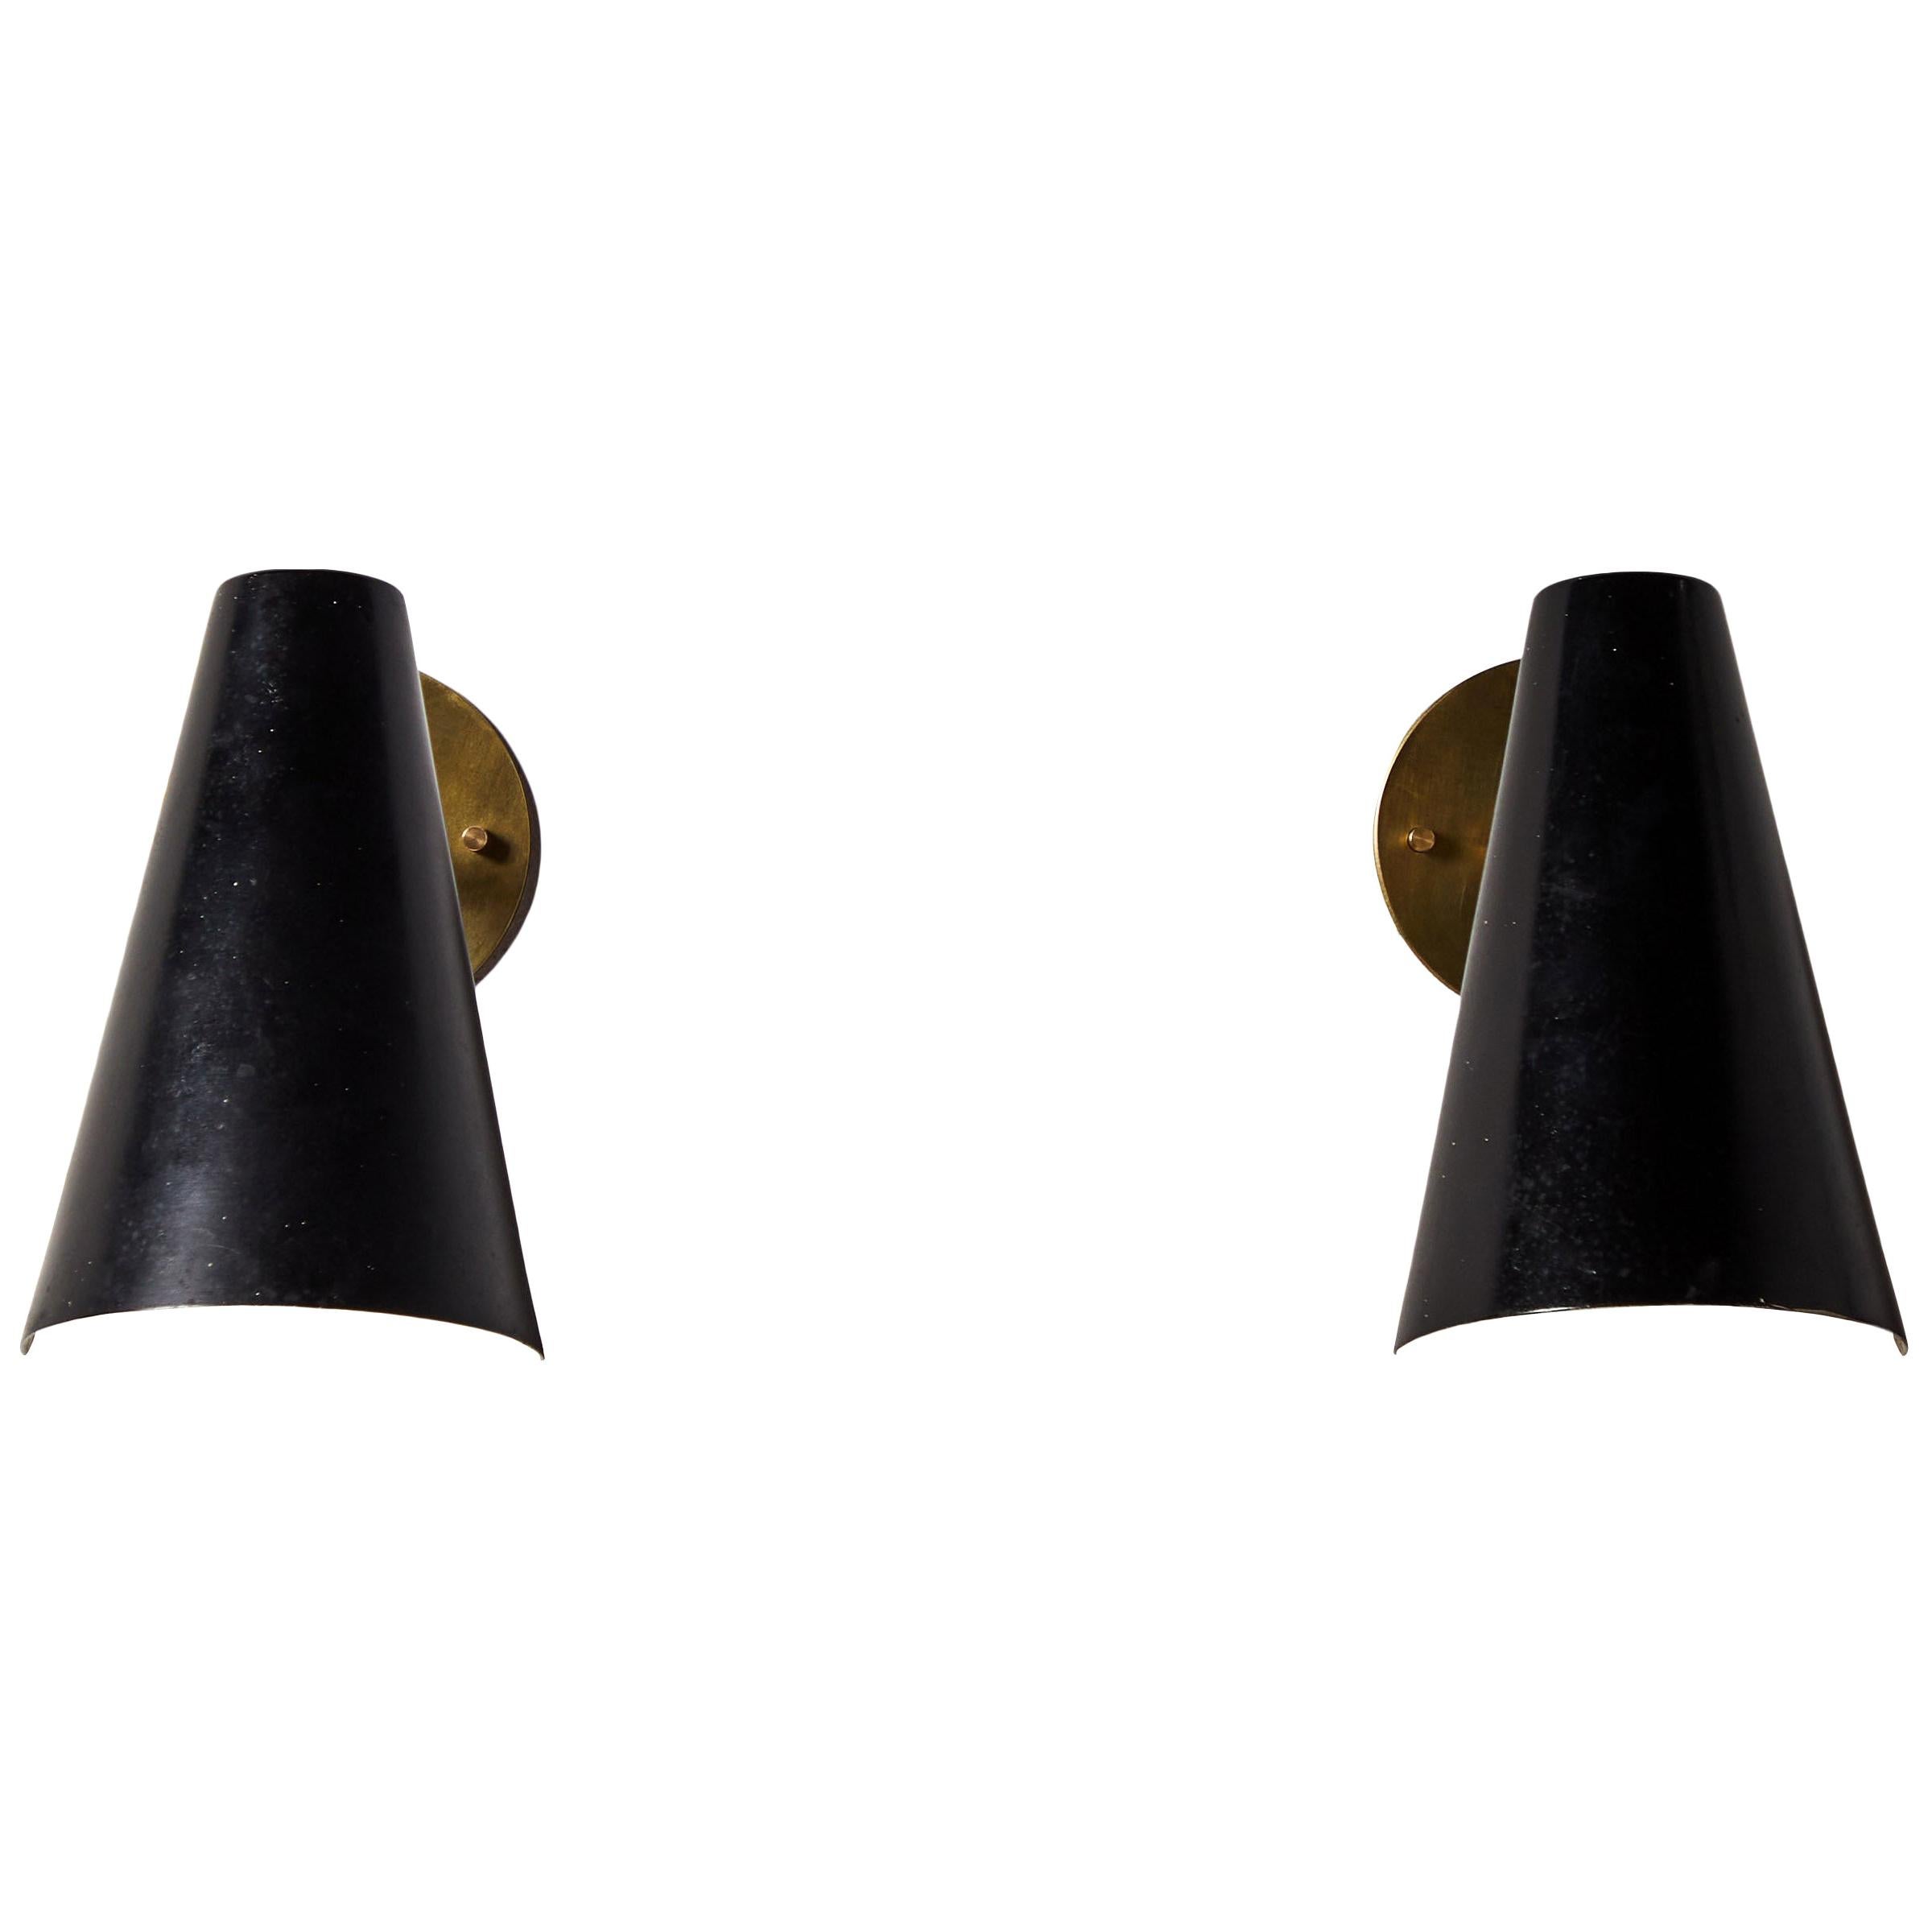 Pair of Sconces by Gino Sarfatti for Arteluce